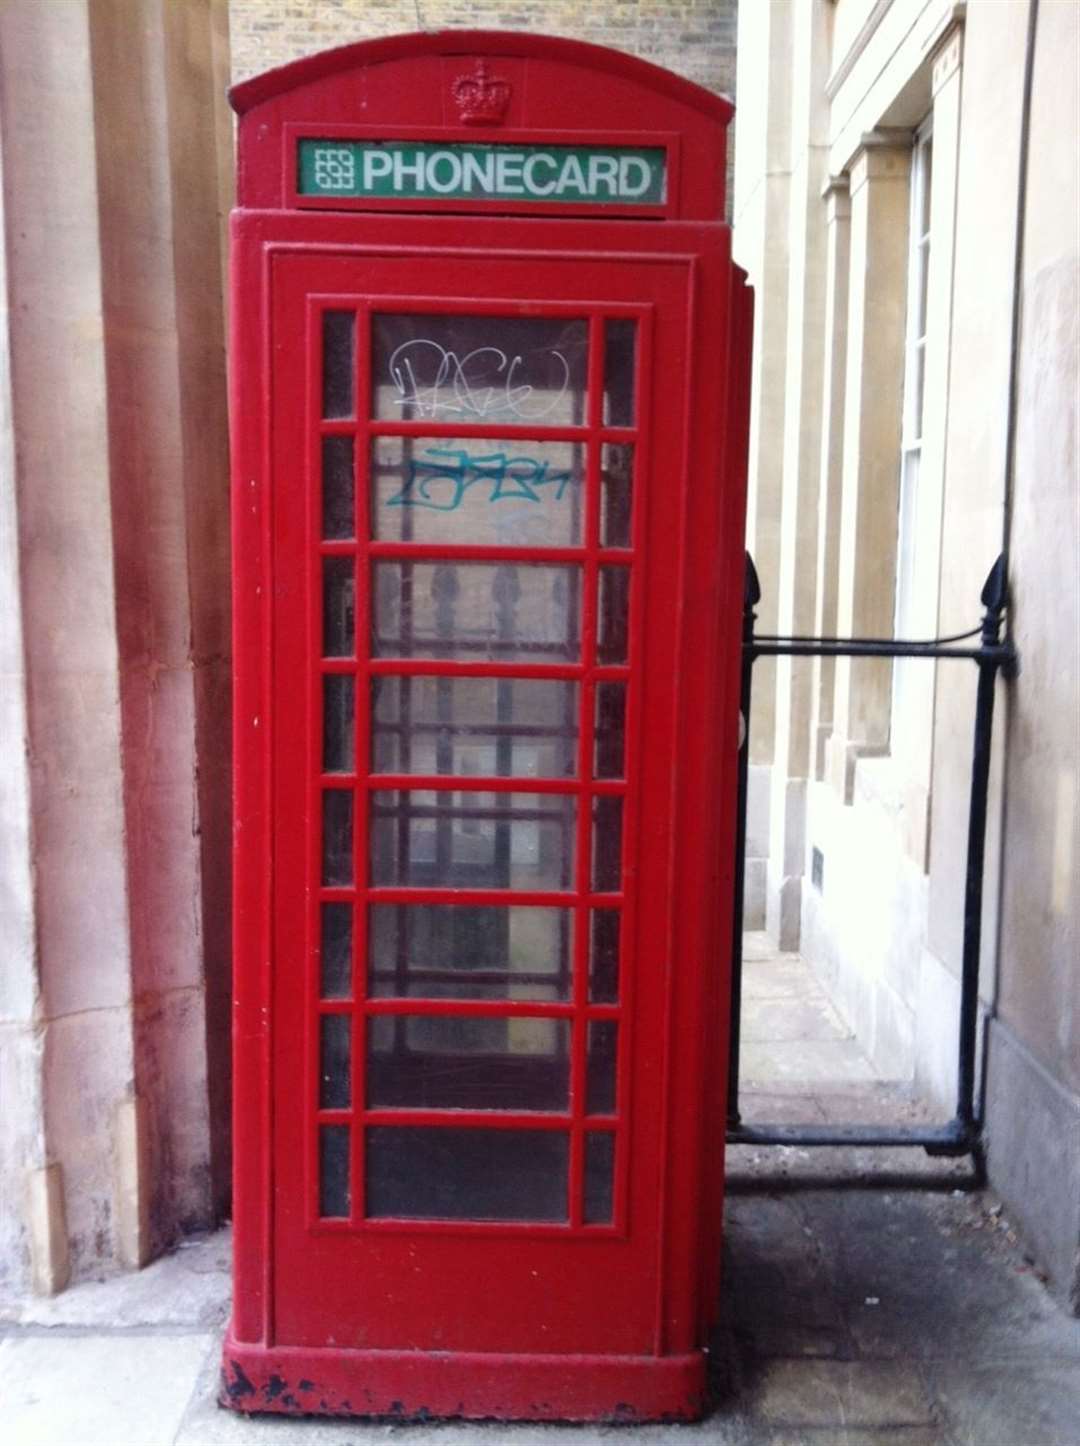 The phone box is outside the Old Town Hall